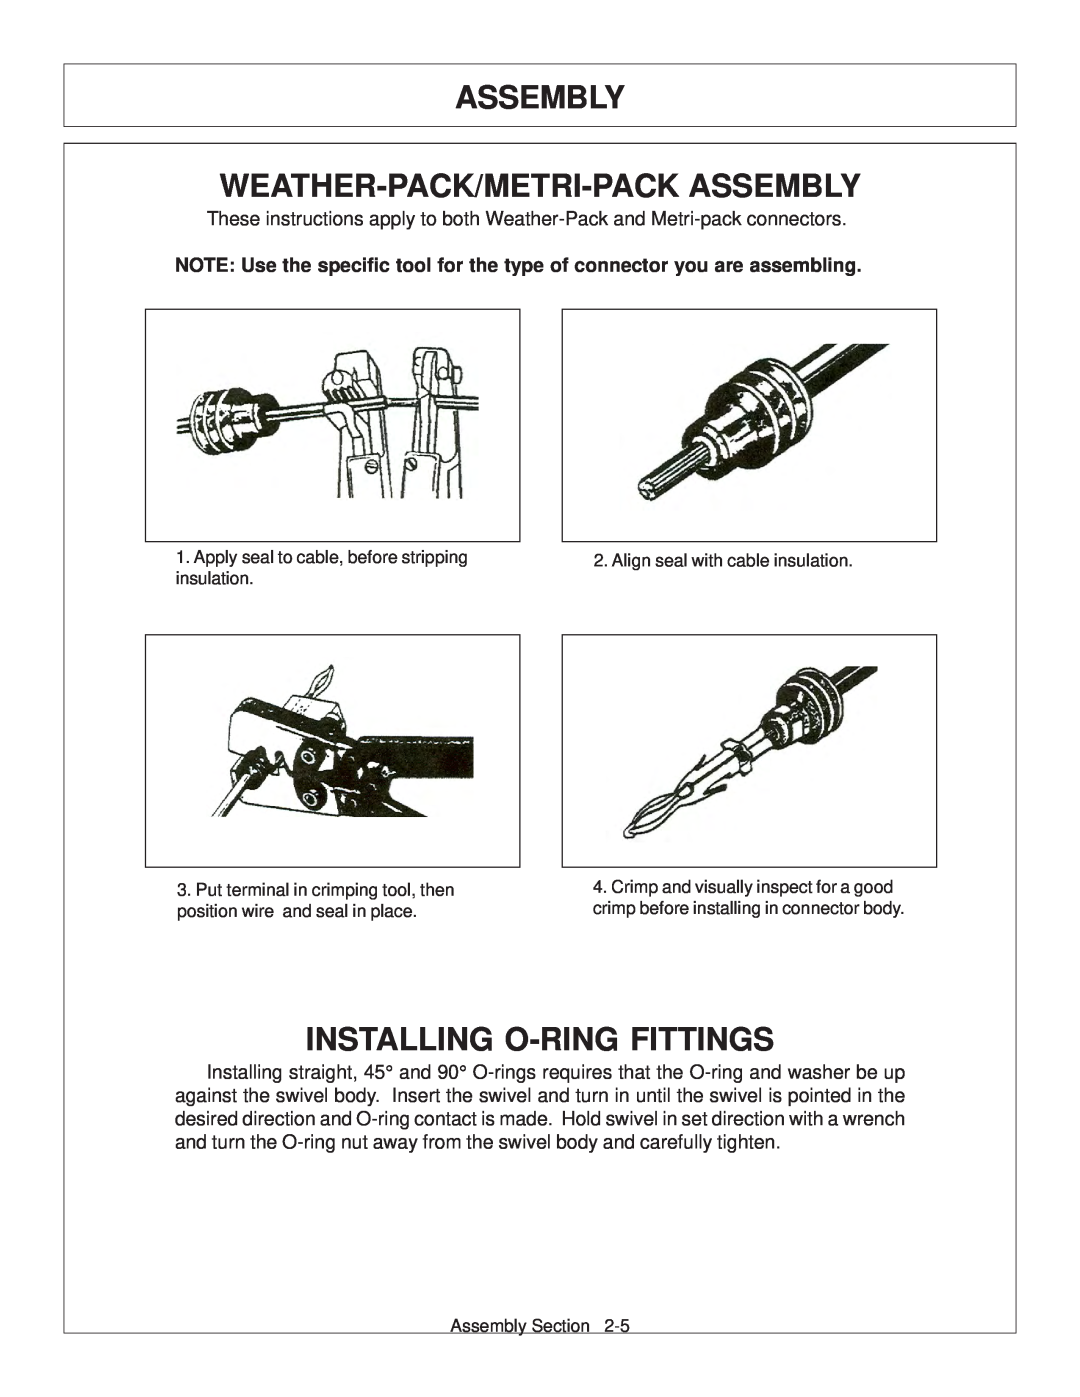 Tiger JD 62-6420 manual Assembly Weather-Pack/Metri-Pack Assembly, Installing O-Ring Fittings 